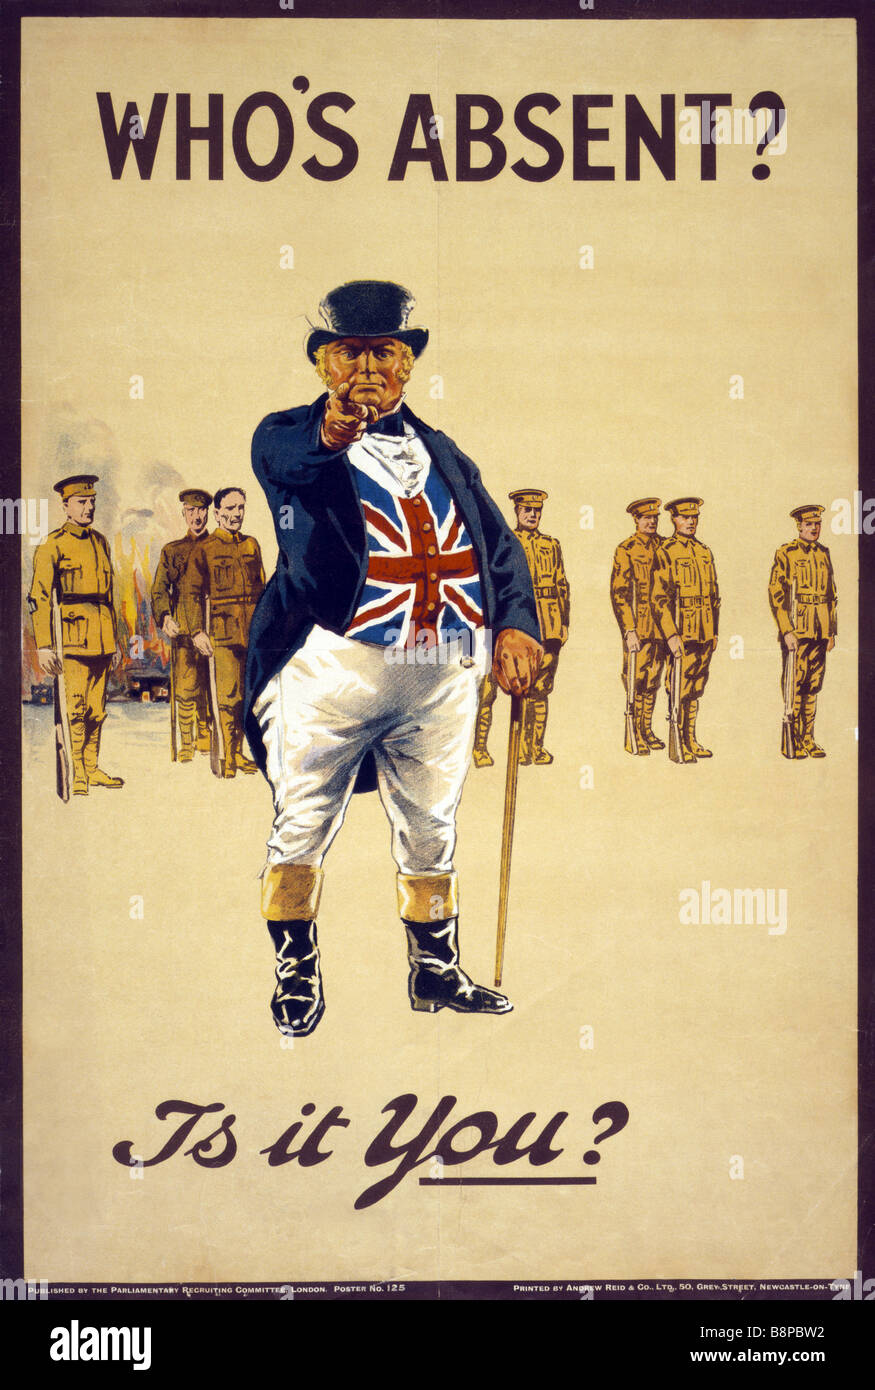 World War One British army recruiting poster featuring the John Bull character pointing and asking 'Who's absent? Is it you?'. Stock Photo